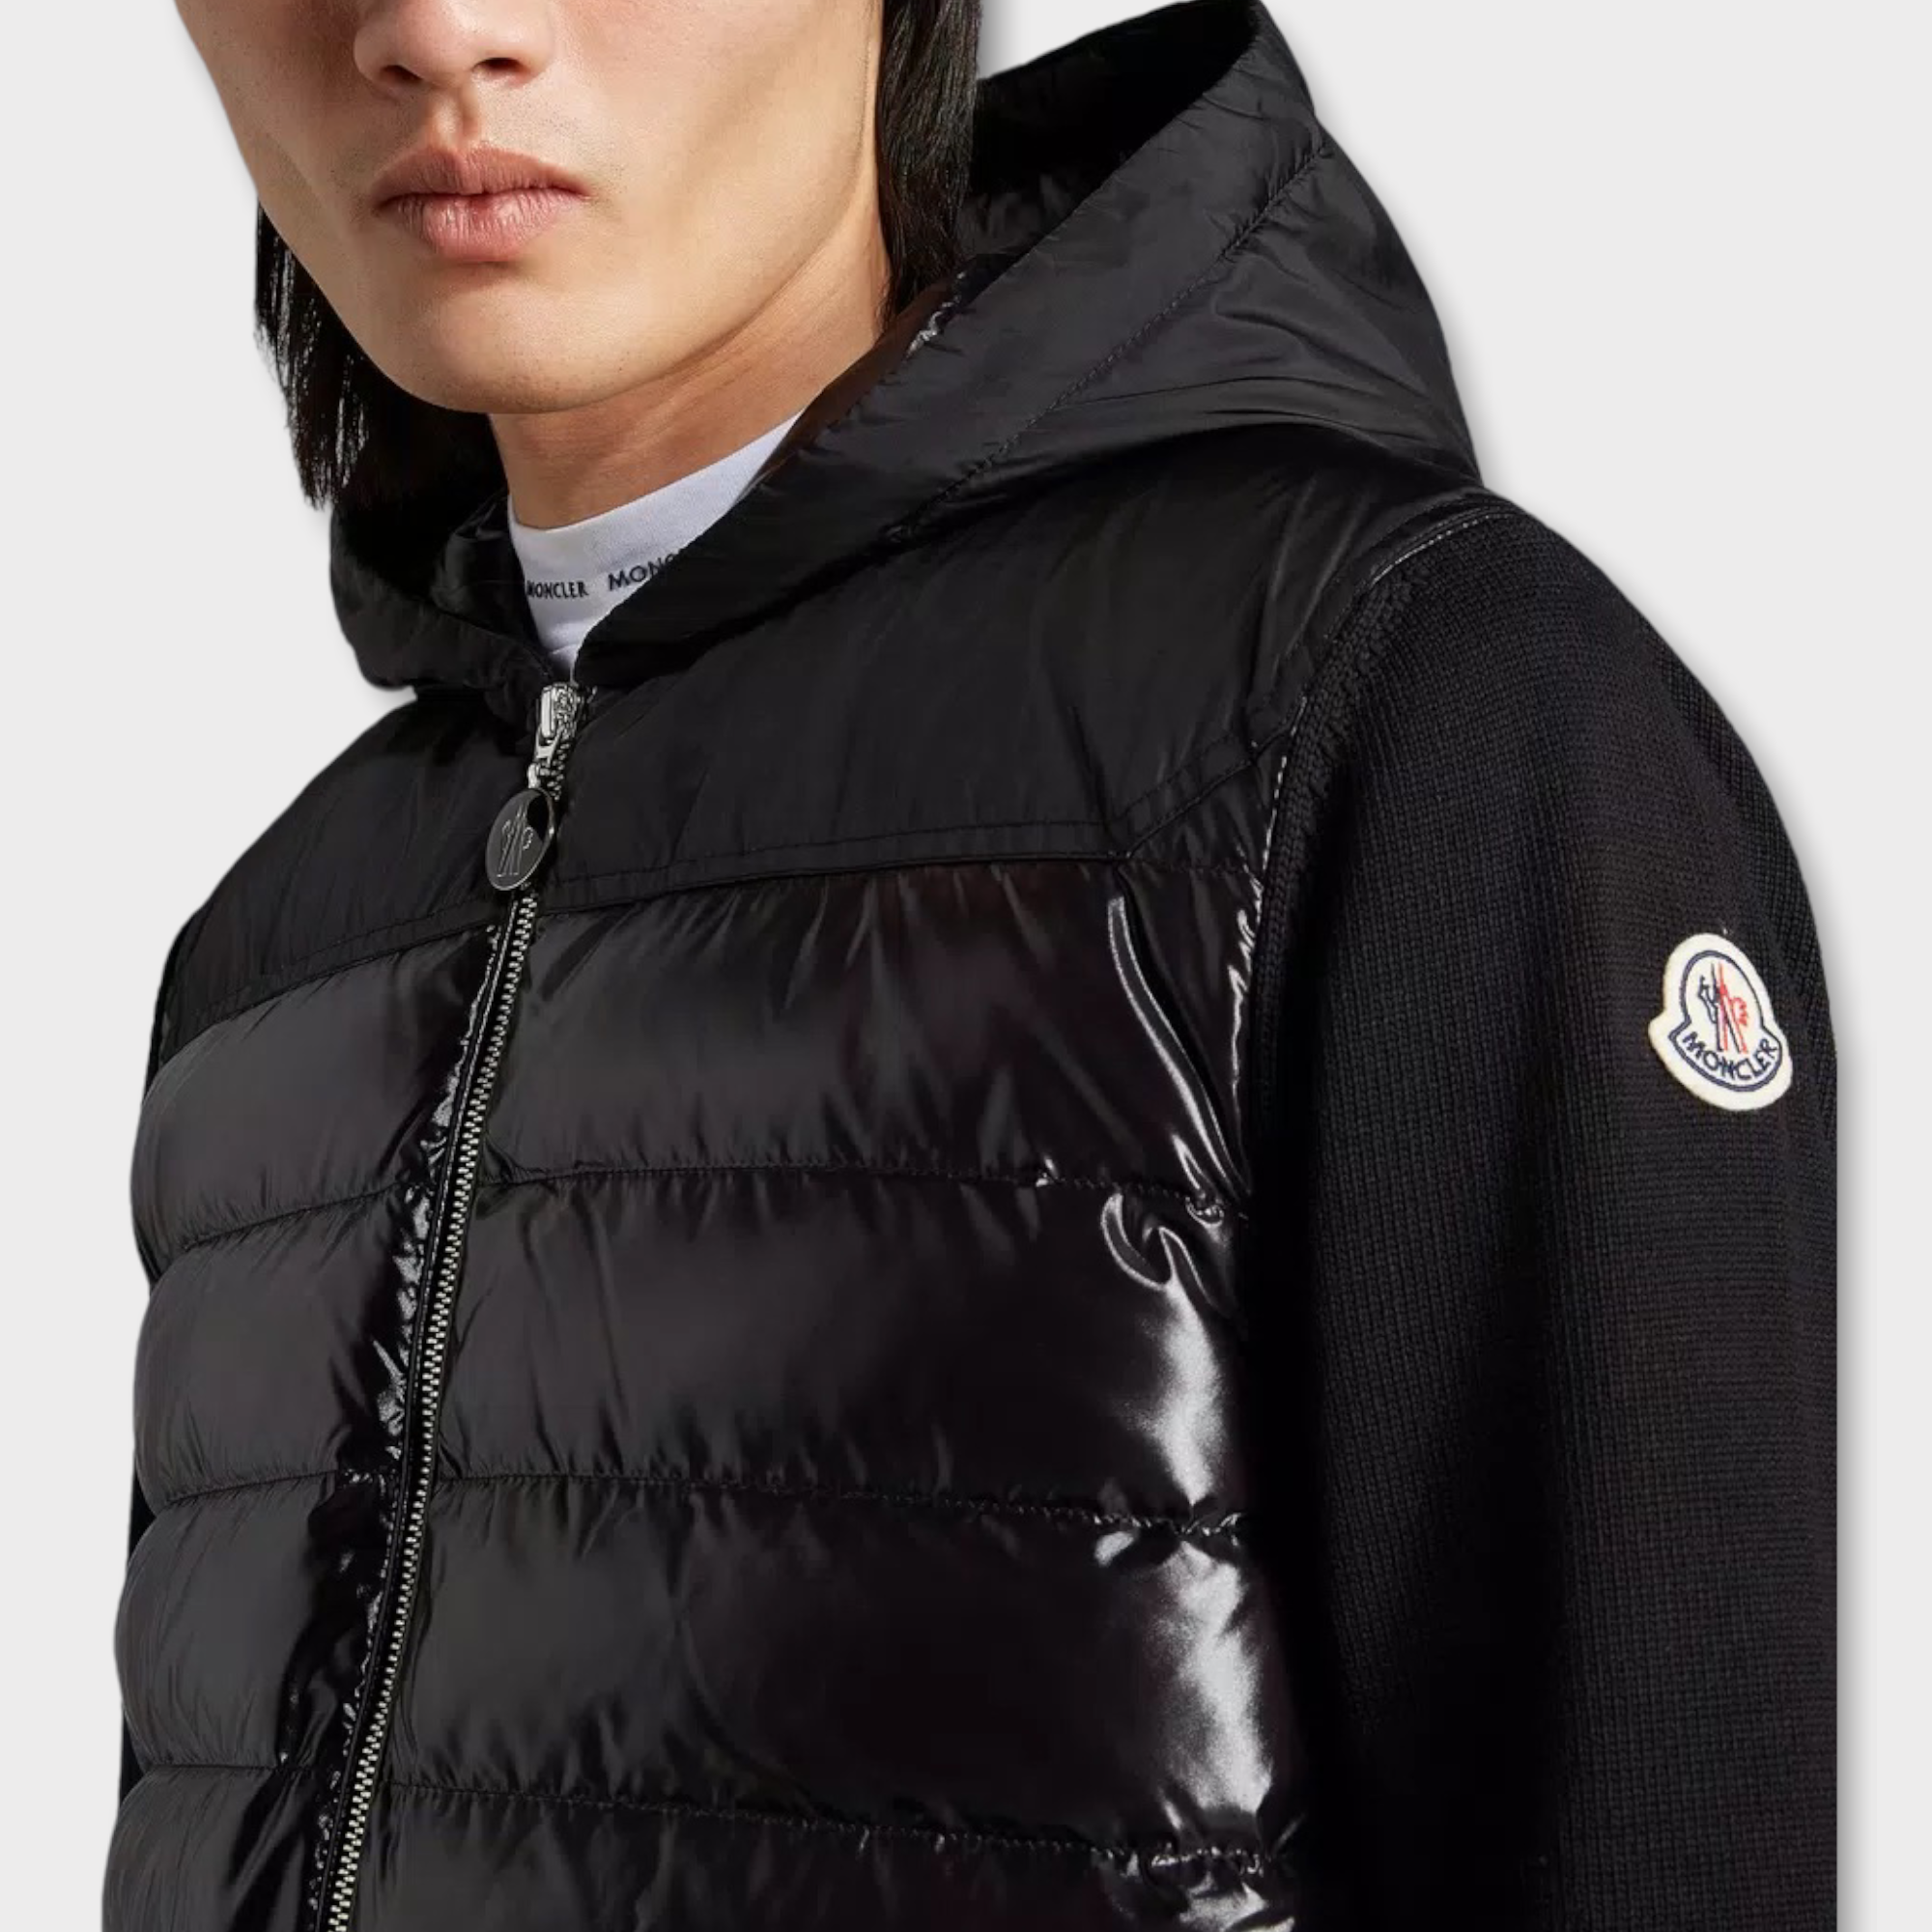 Moncler Hooded Down Cardigan - Size XXL (Fits XL)